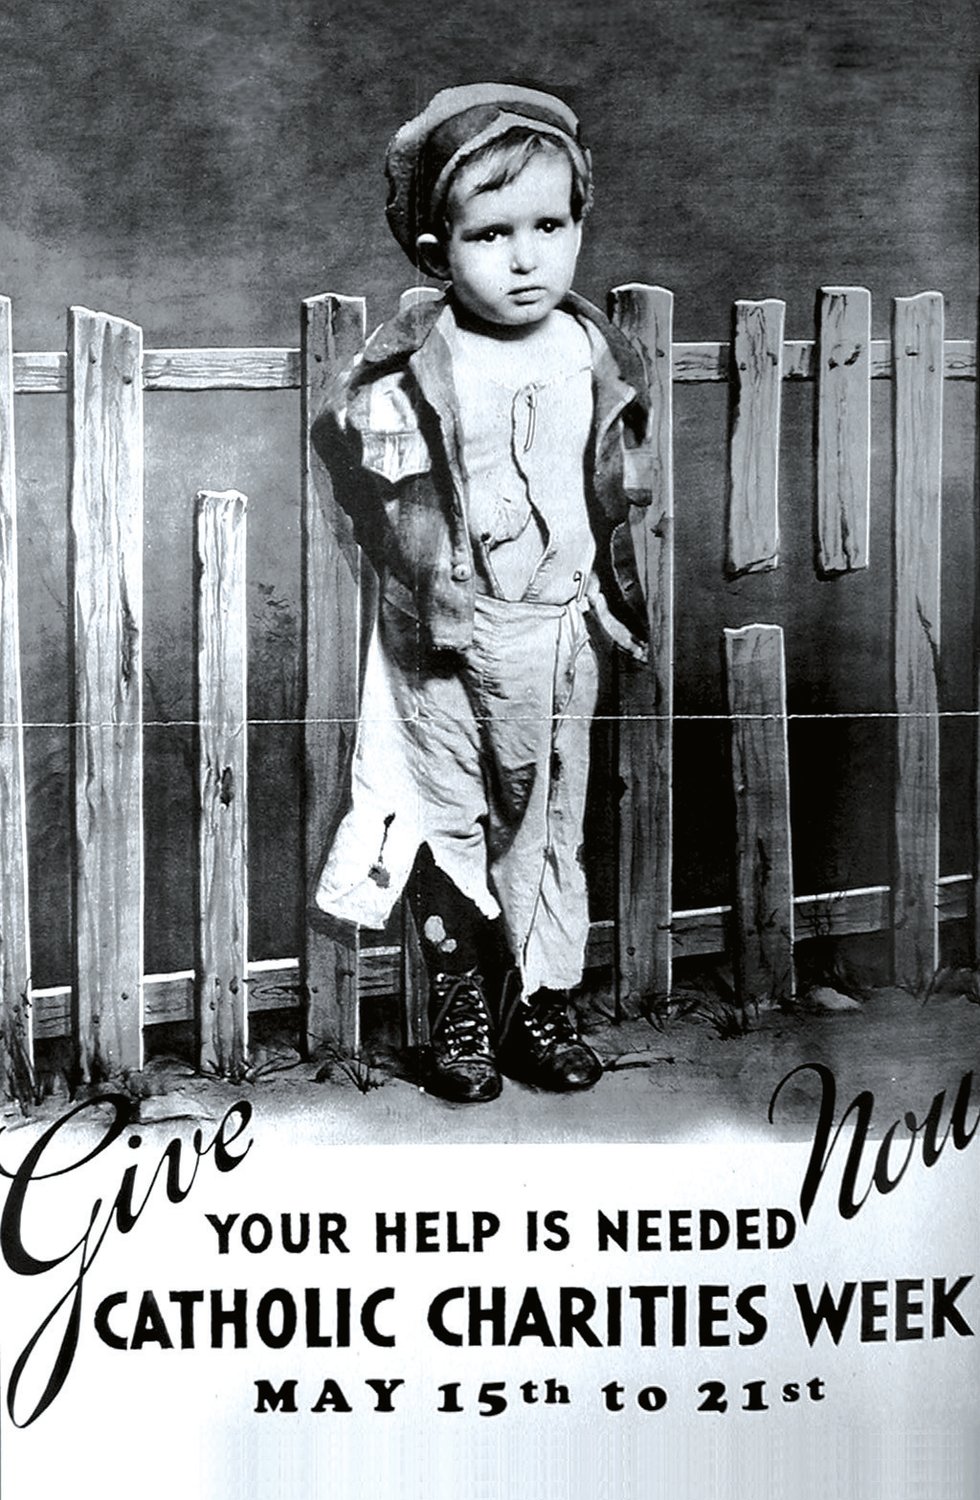 In September 1910, nearly 400 people involved in Catholic charitable work—clergy, lay and re­ligious men and women, social workers, and academics—gathered at The Catholic University of America in Washington, DC, for the historic founding of the National Conference of Catholic Charities (NCCC). Above, a poster appeals for funds during the Great Depression.